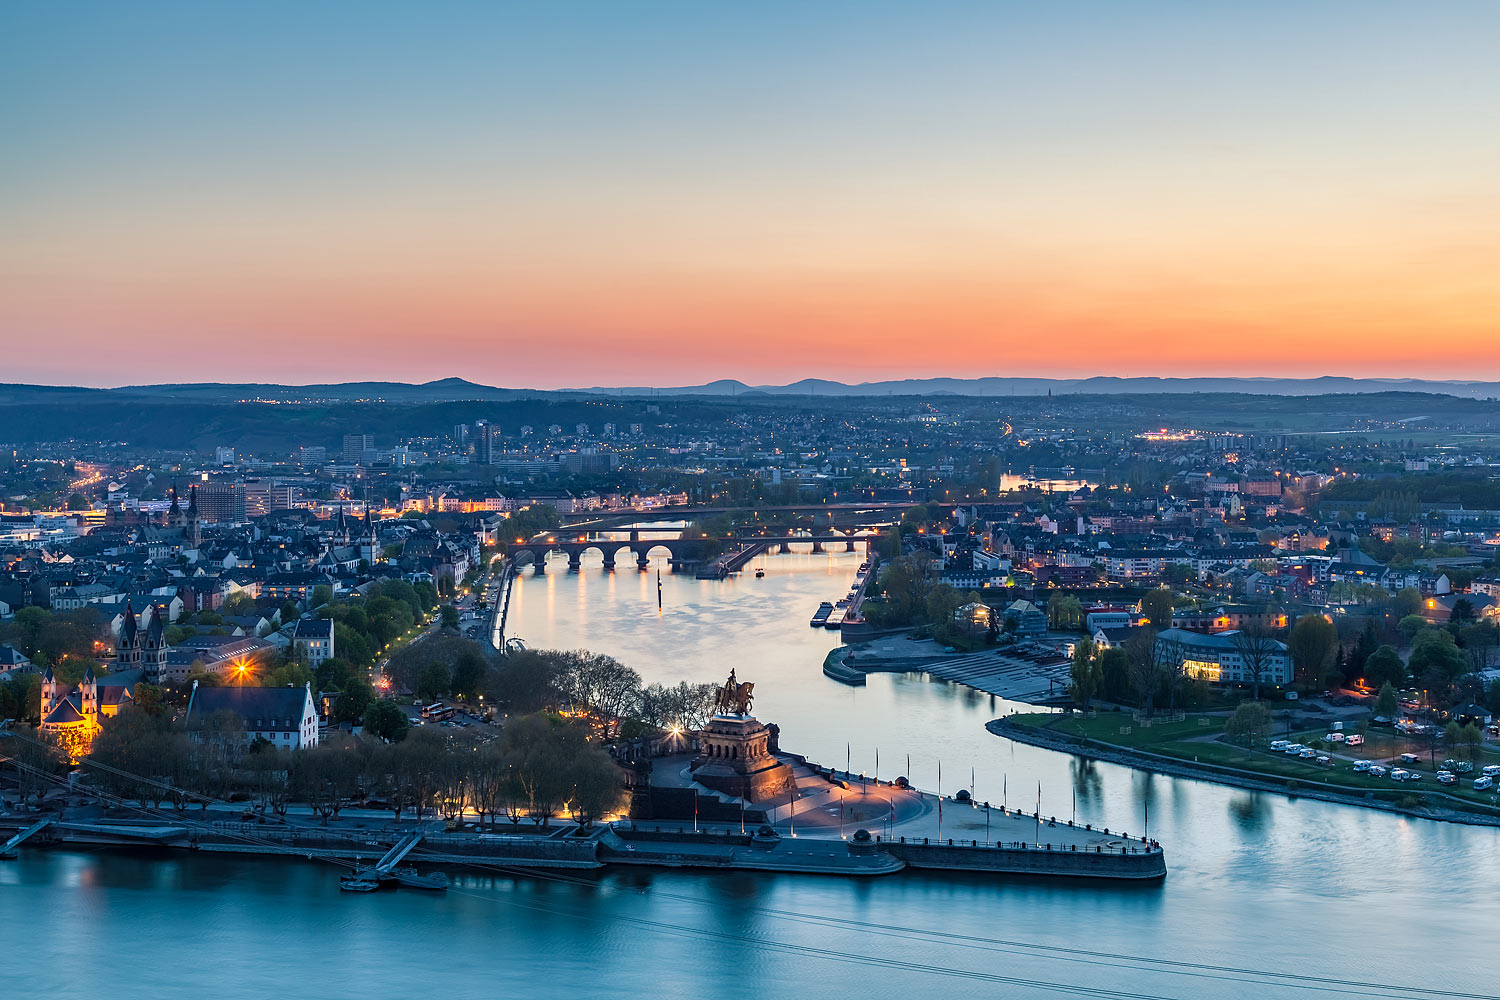 Koblenz, Germany - Panorama of the City at Sunset